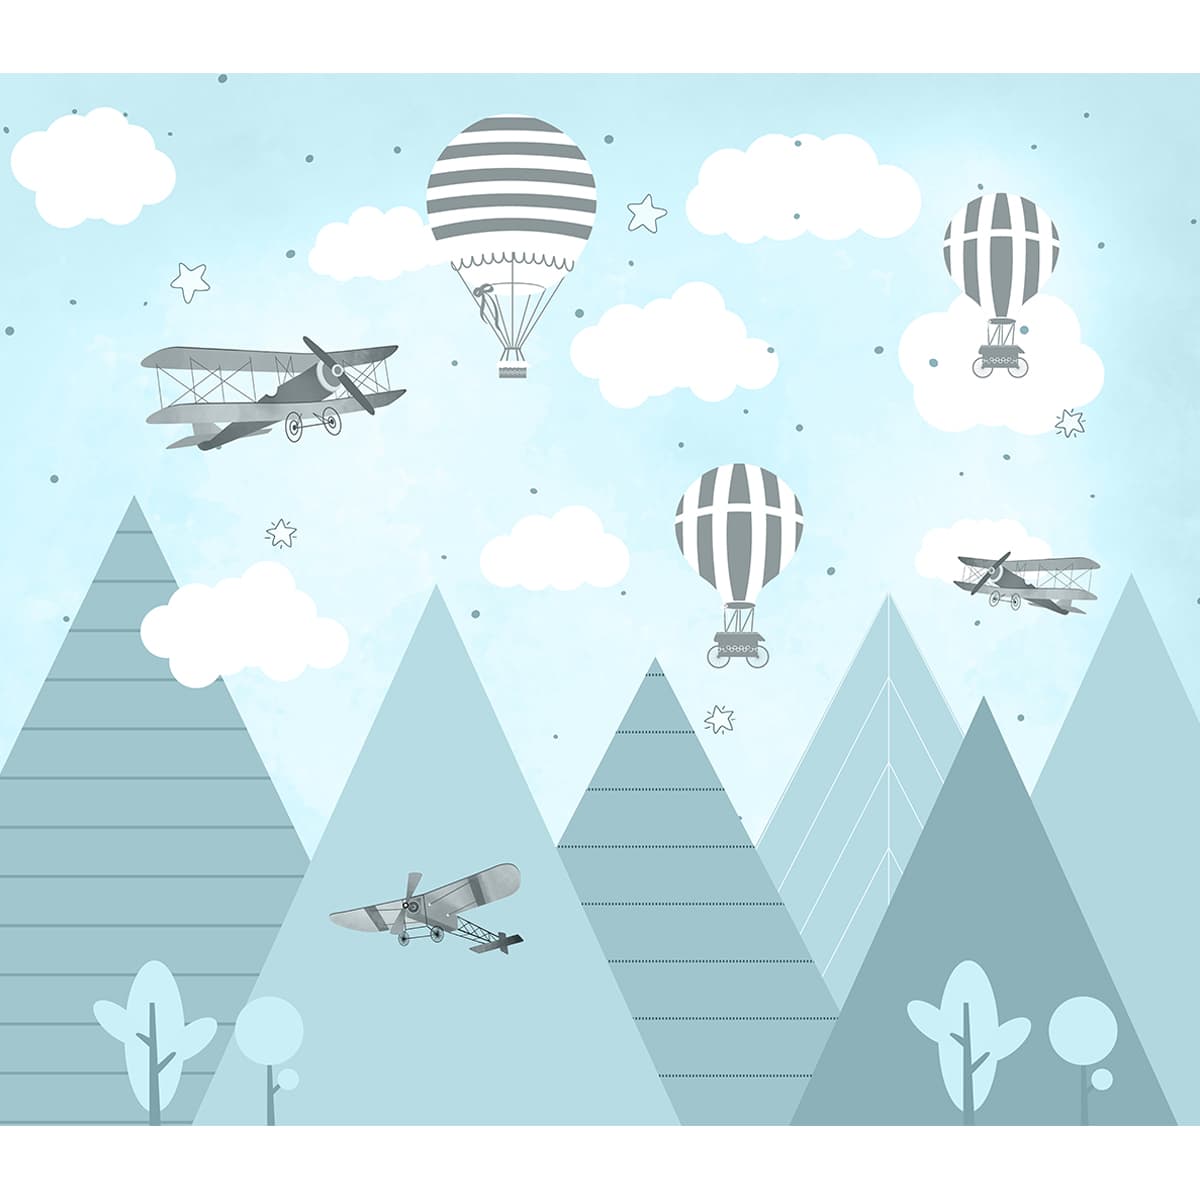 Gliders And Hot Air Balloons Wallpaper, Customised, Blue